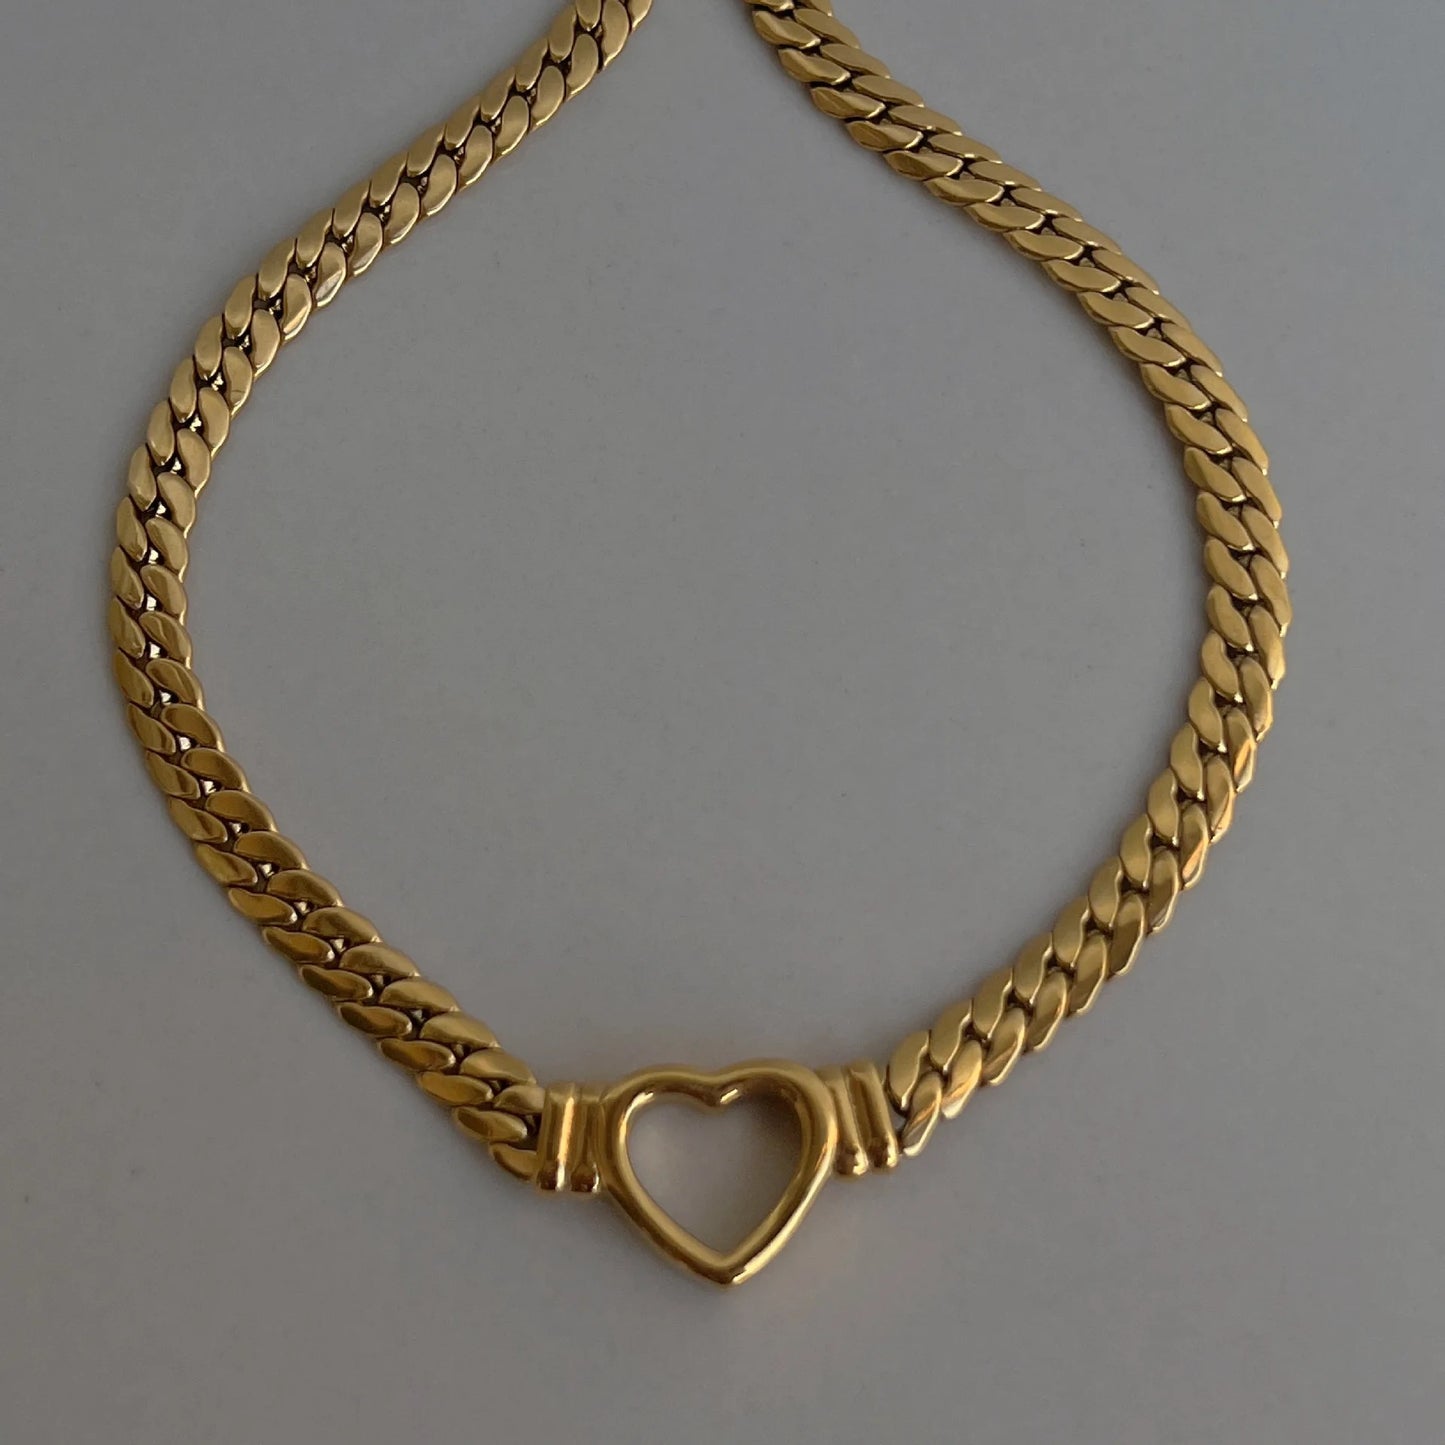 AMOUR Necklace